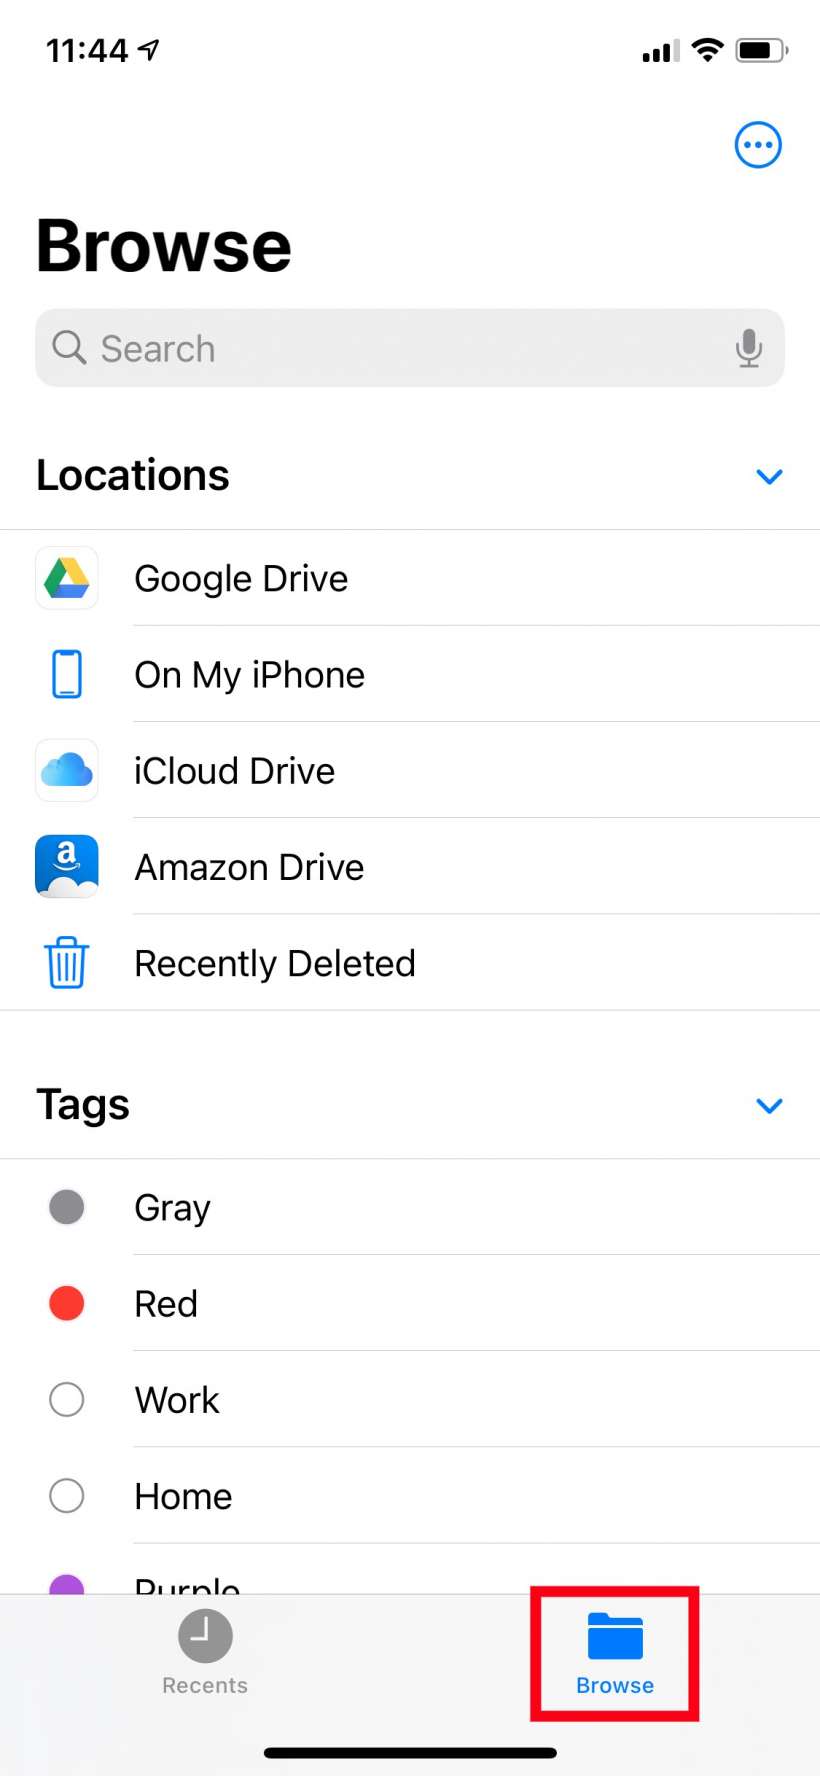 How to use Dropbox, Google Drive, OneDrive, Amazon Drive and other cloud storage services with the Files app on iPhone and iPad.